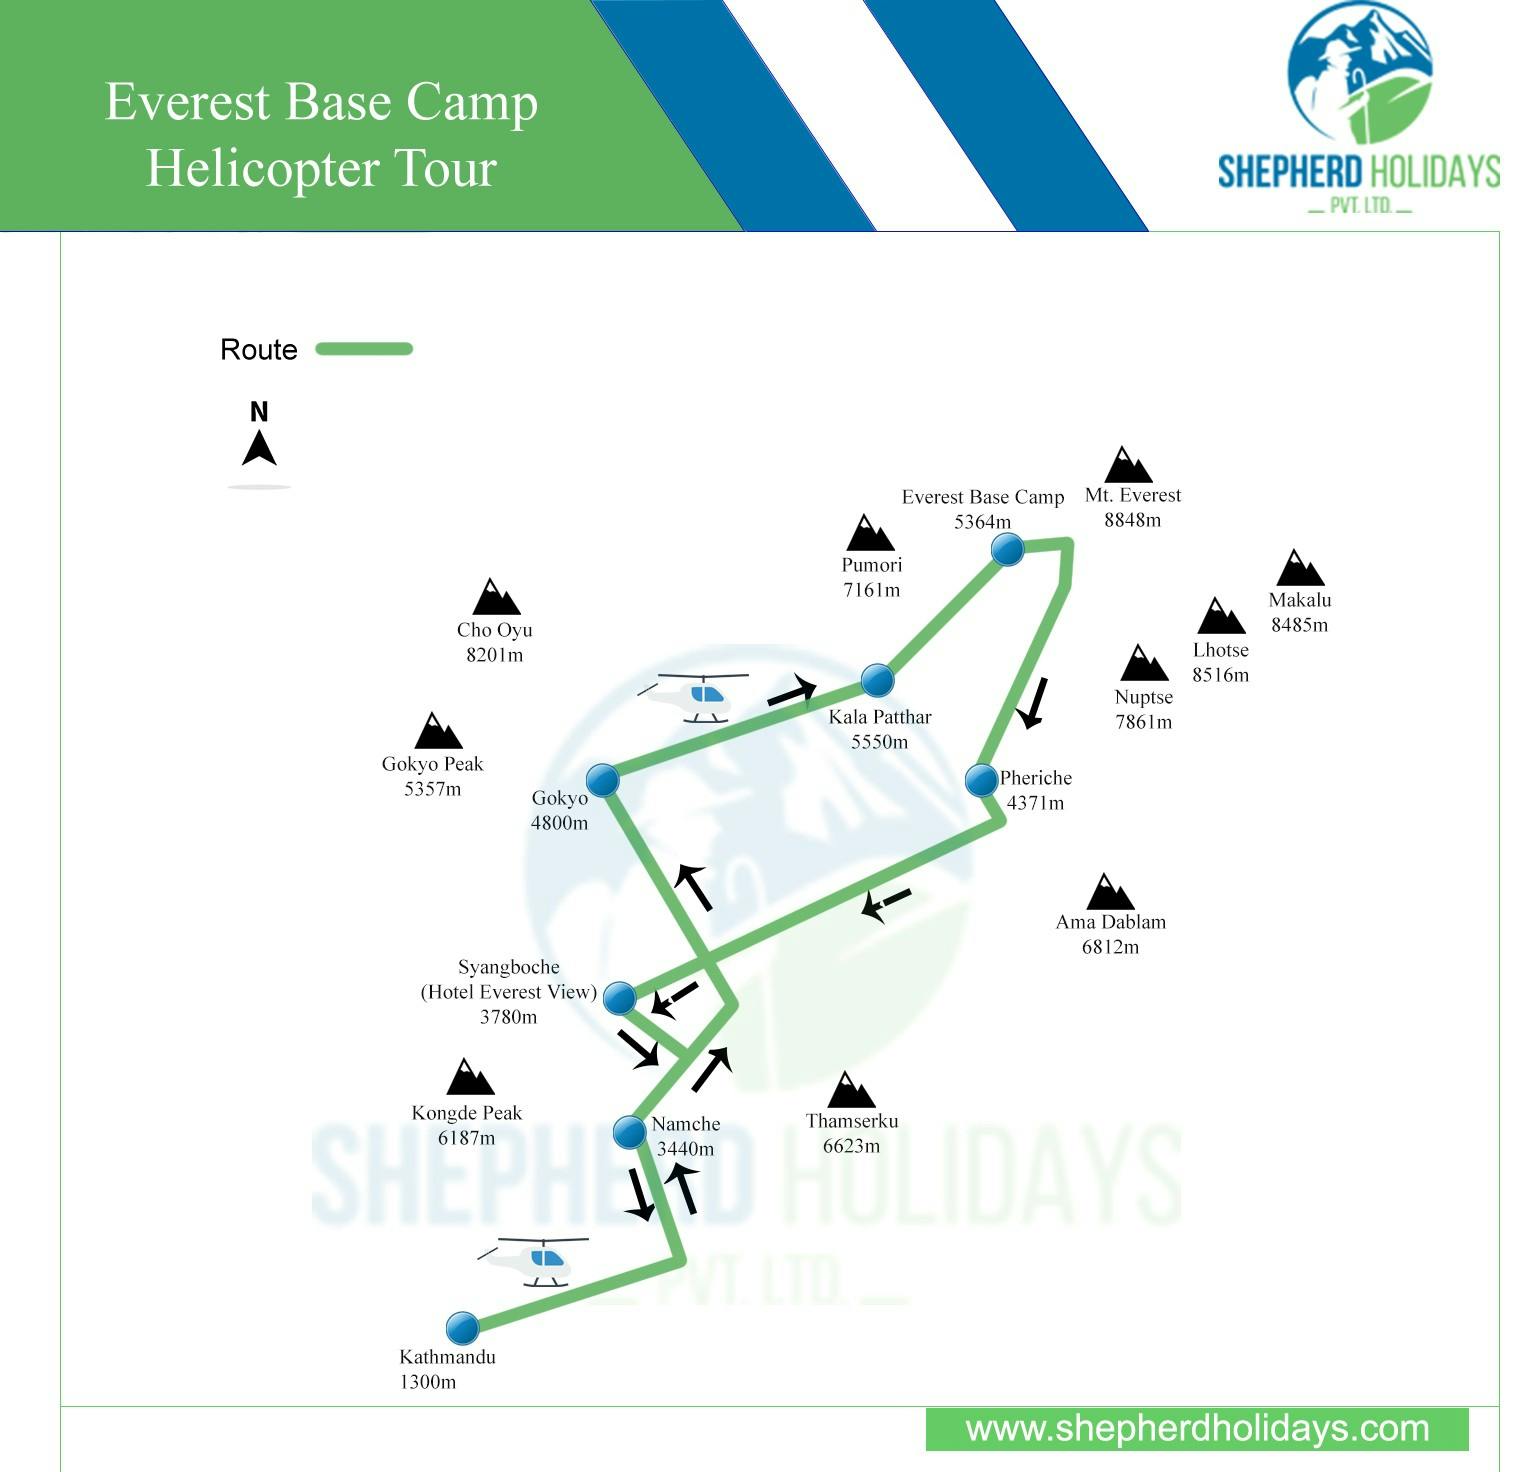 Everest Base Camp Tour by HelicopterMap